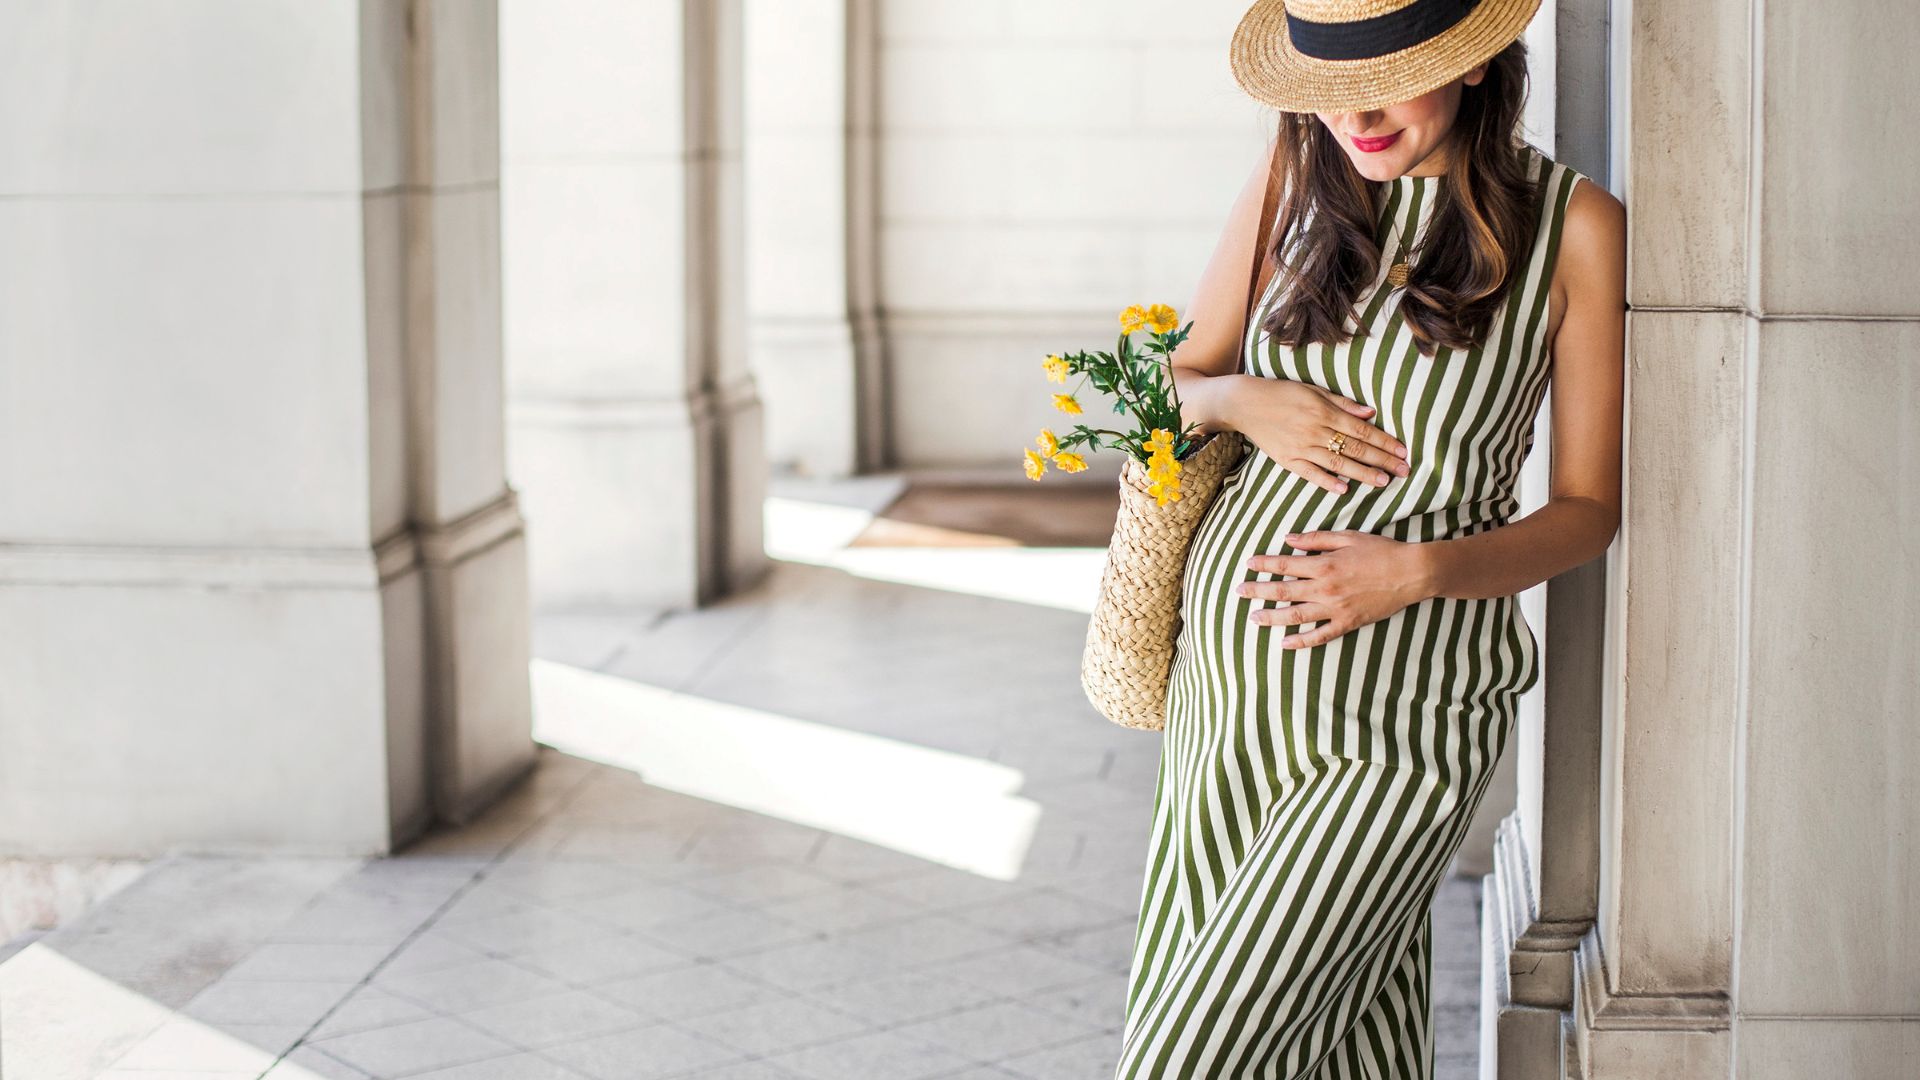 Looking stylish during pregnancy - tips for a comfortable & fashionable summer wardrobe